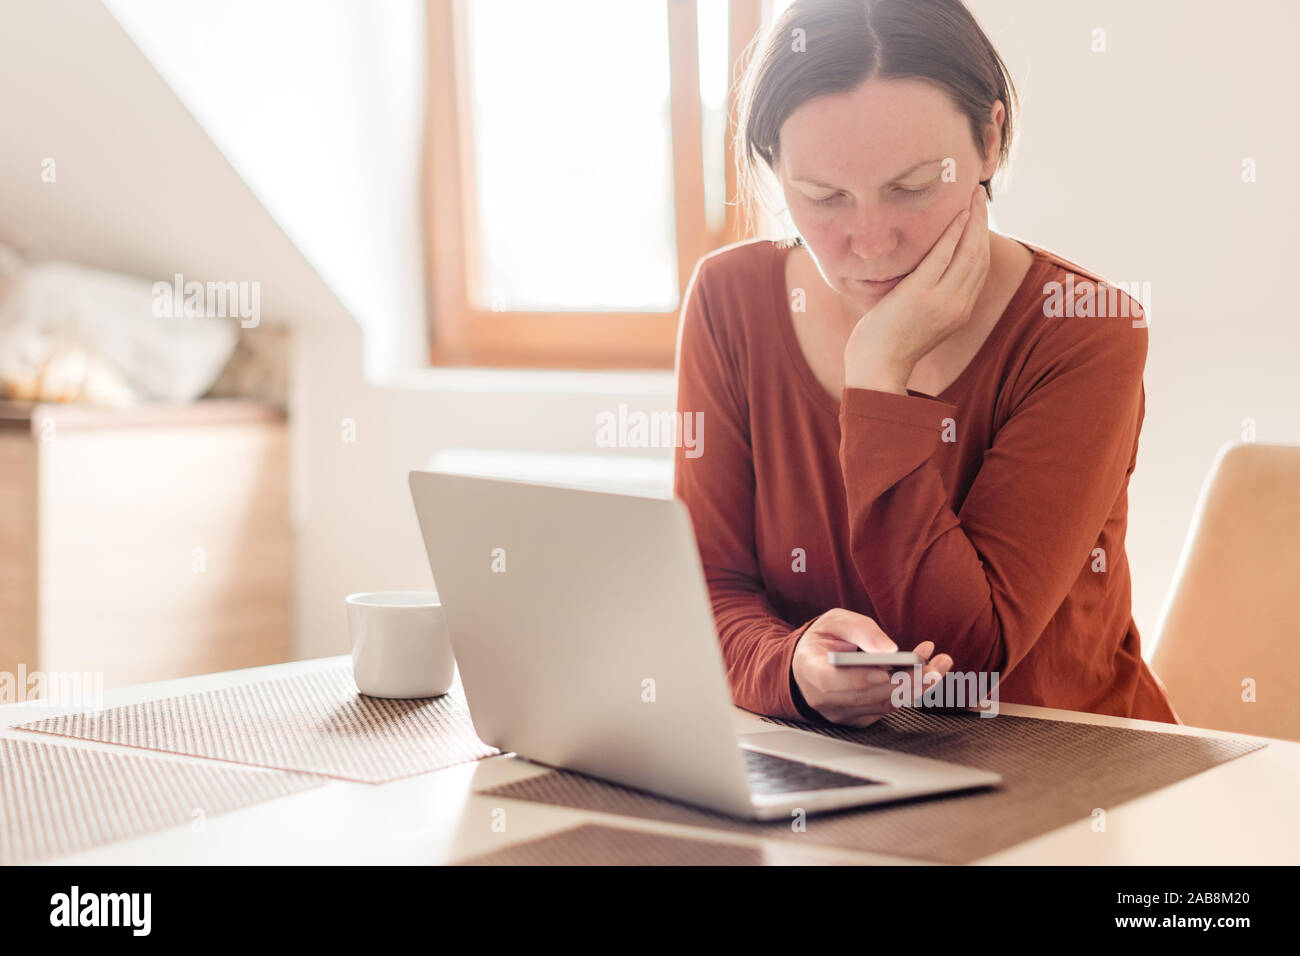 Woman telecommuting in home office interior. Portrait of female freelancer using mobile phone, selective focus. Stock Photo